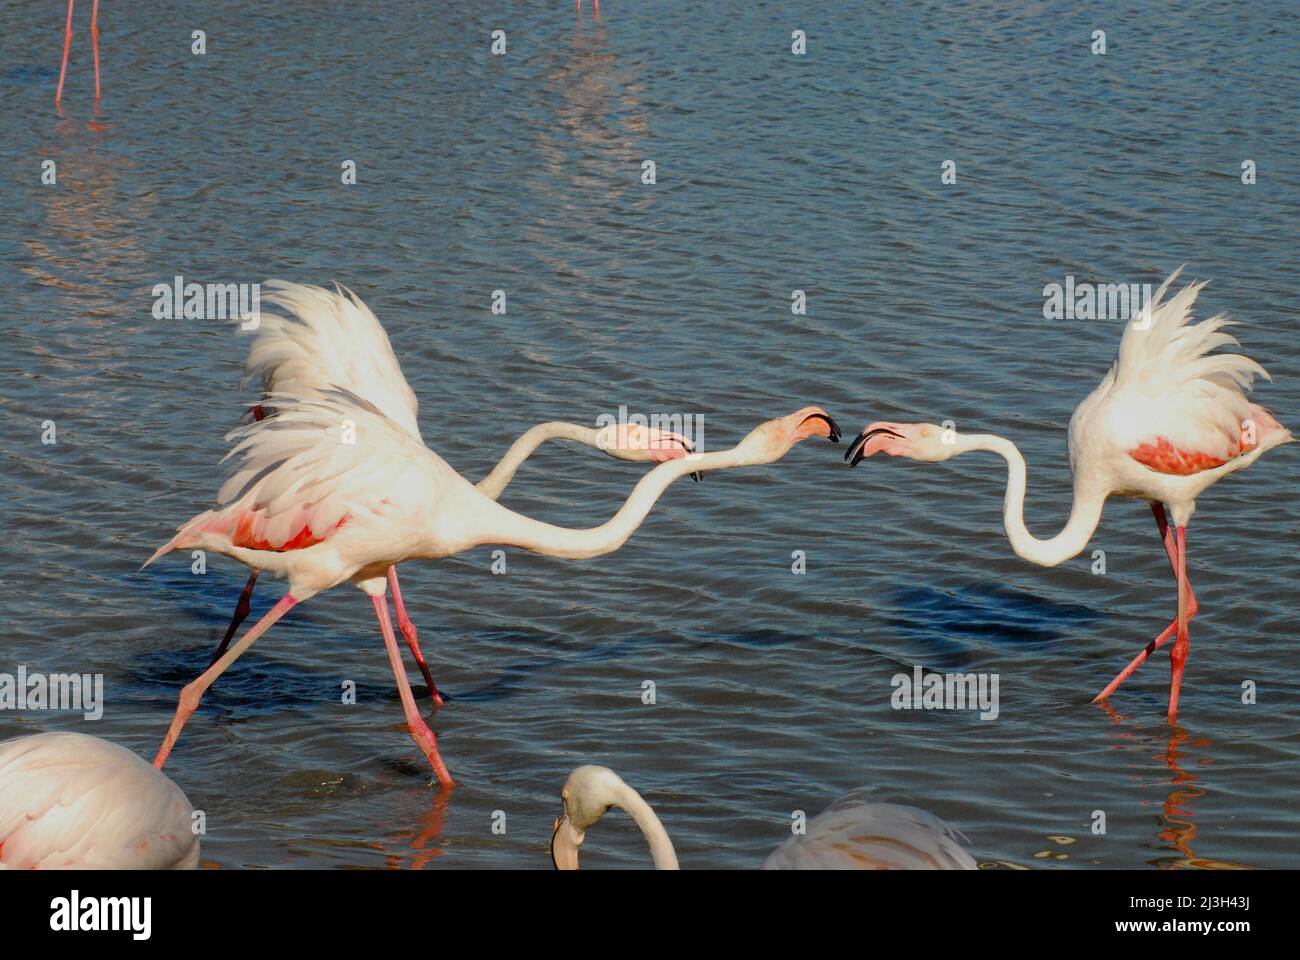 Close up of 3 wild Flamingos fighting while feeding in the Rhone river in the Camargue region of France.  Left uncropped for maximum flexibility. Stock Photo